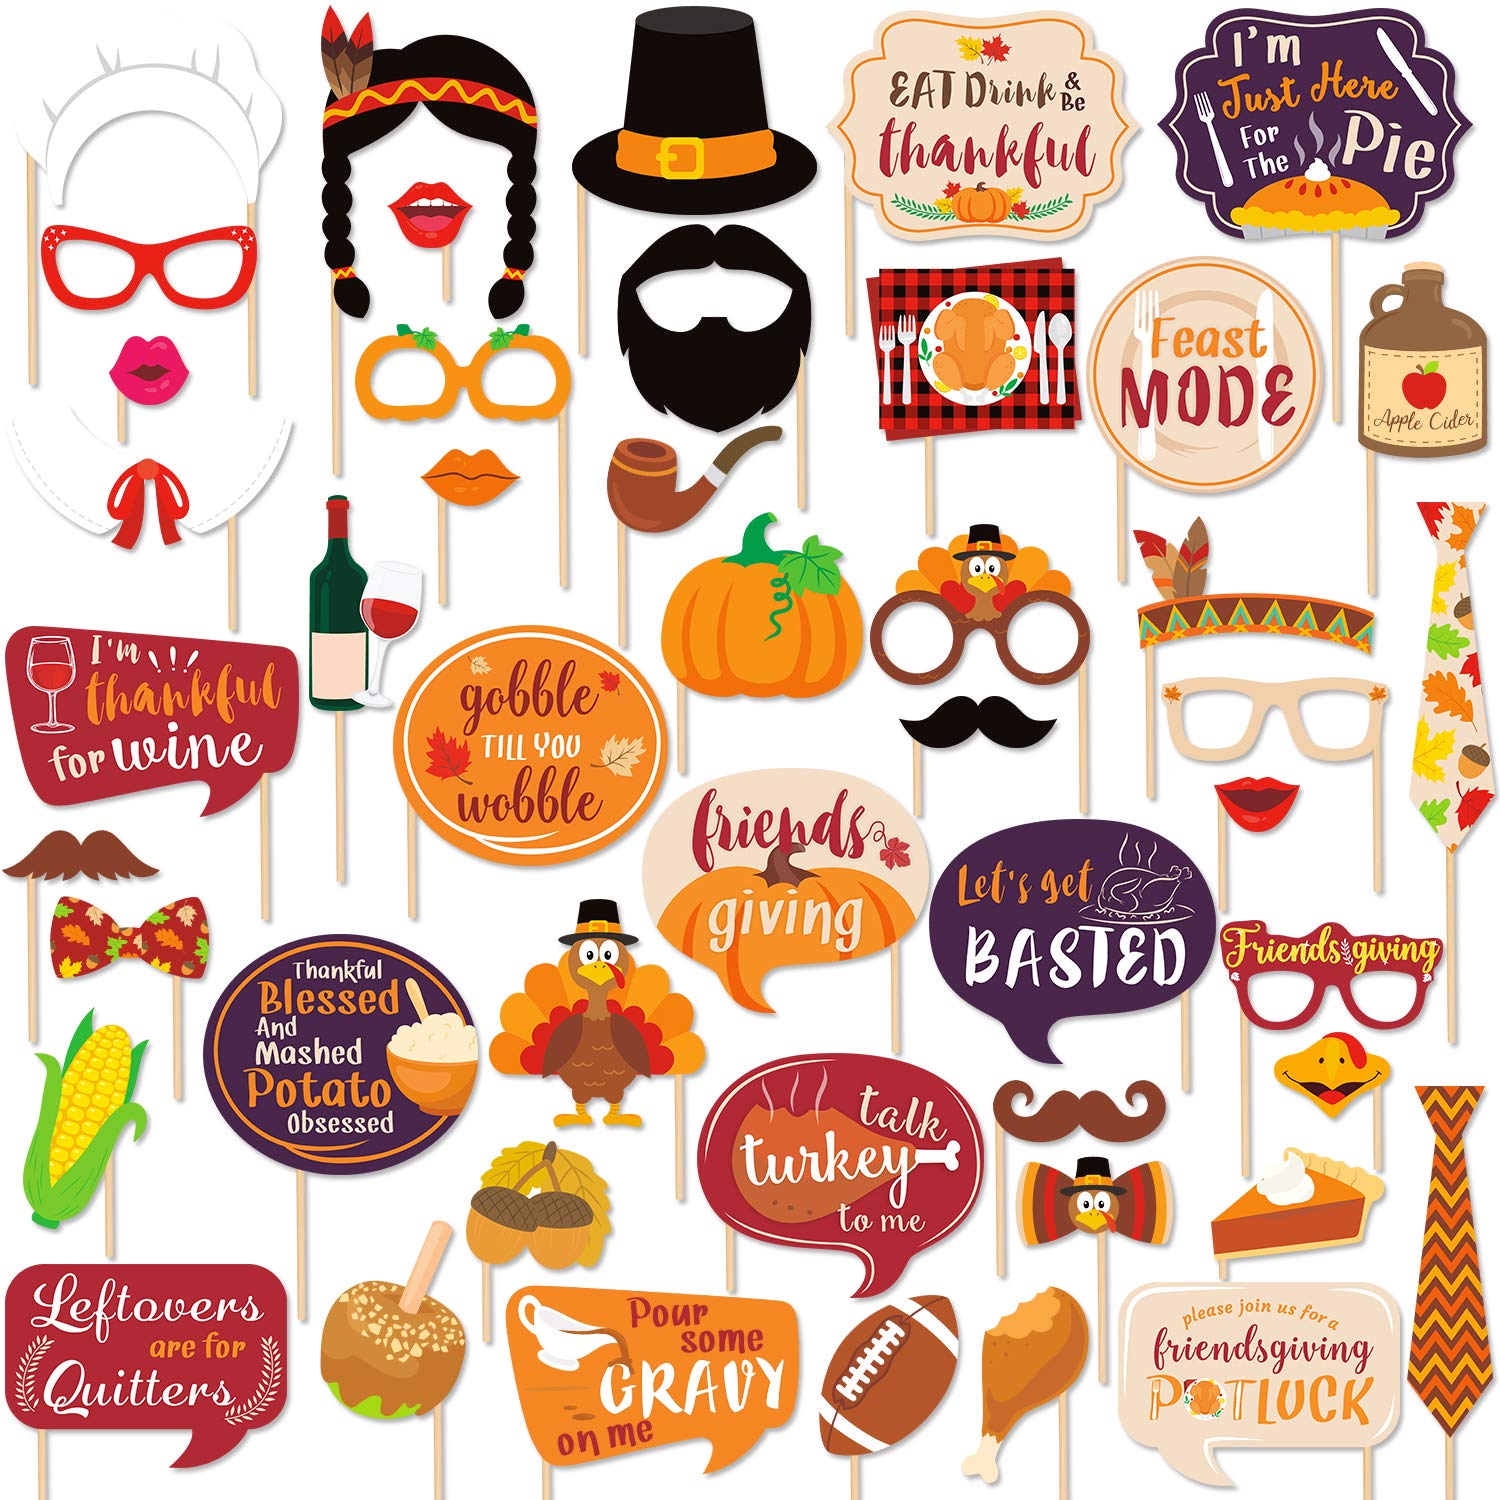 47 PCS Friendsgiving Photo Booth Props For Friends Thanksgiving Feast Give  Thanks Fall Harvest Funny Turkey Party Decorations Supplies.